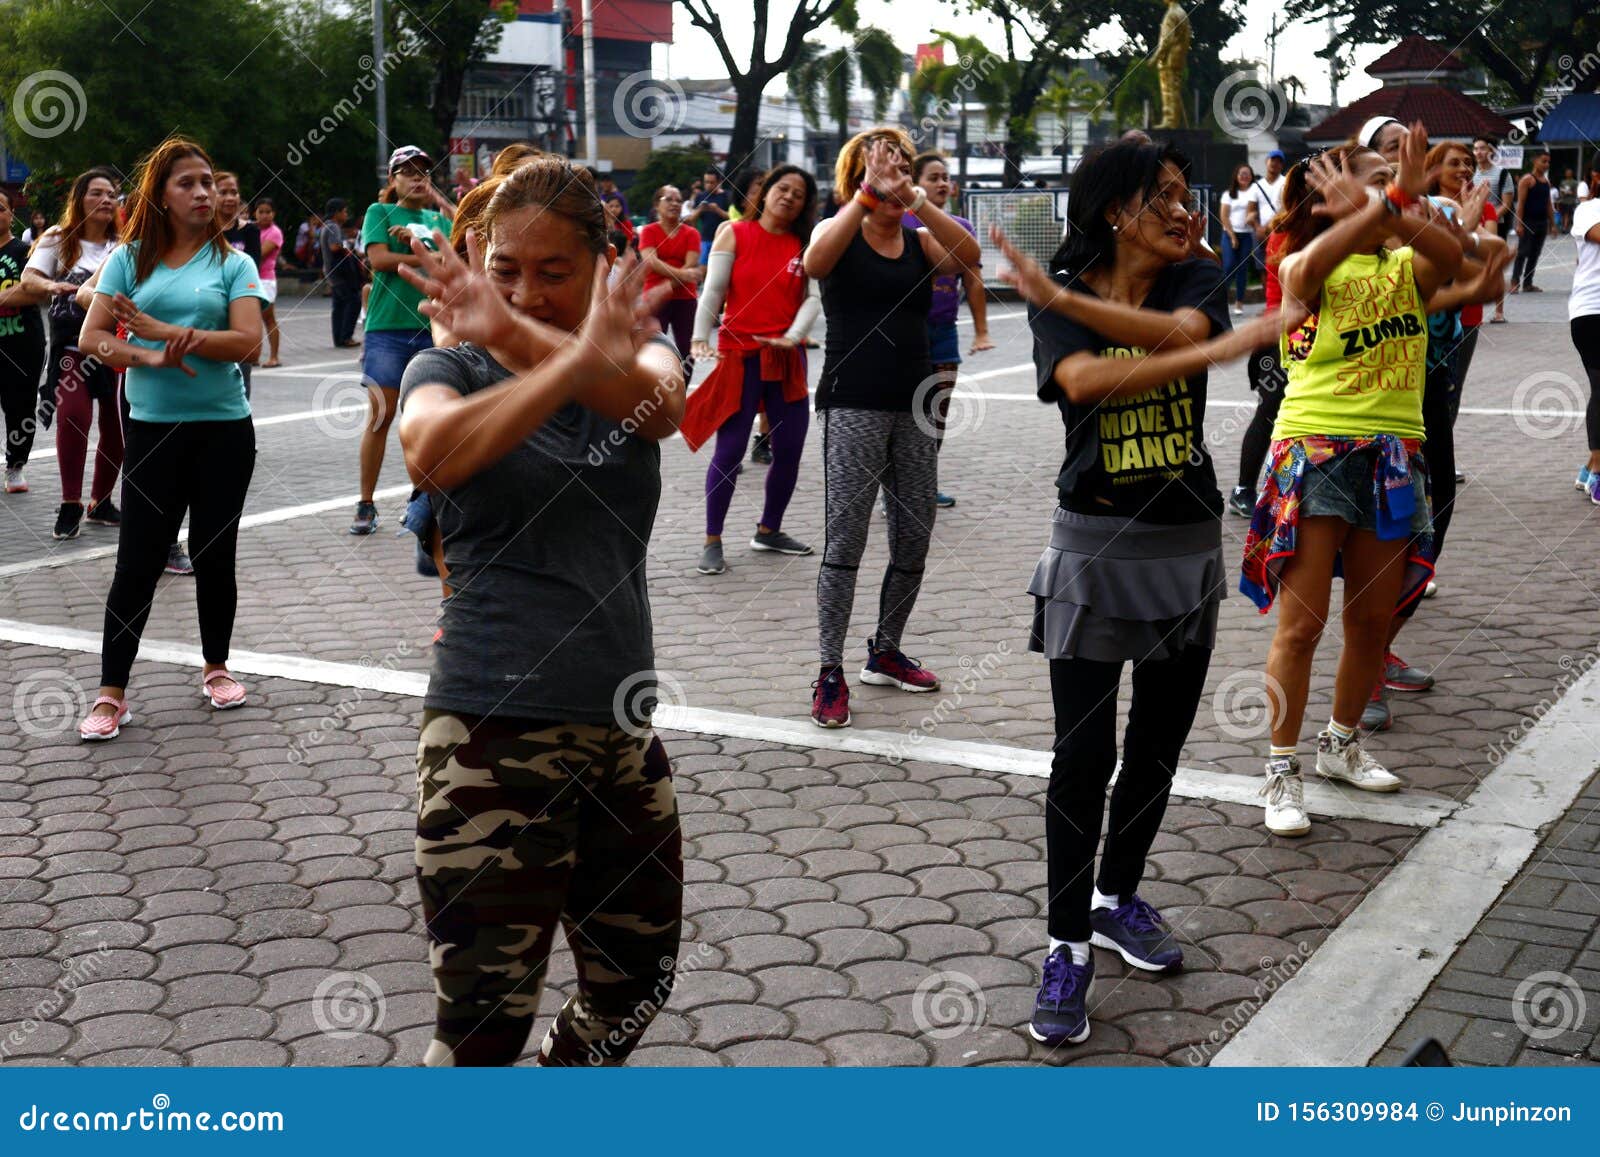 Adult Filipino Ladies Participate In A Zumba Or Dance Exercise Class At A Public Park Editorial